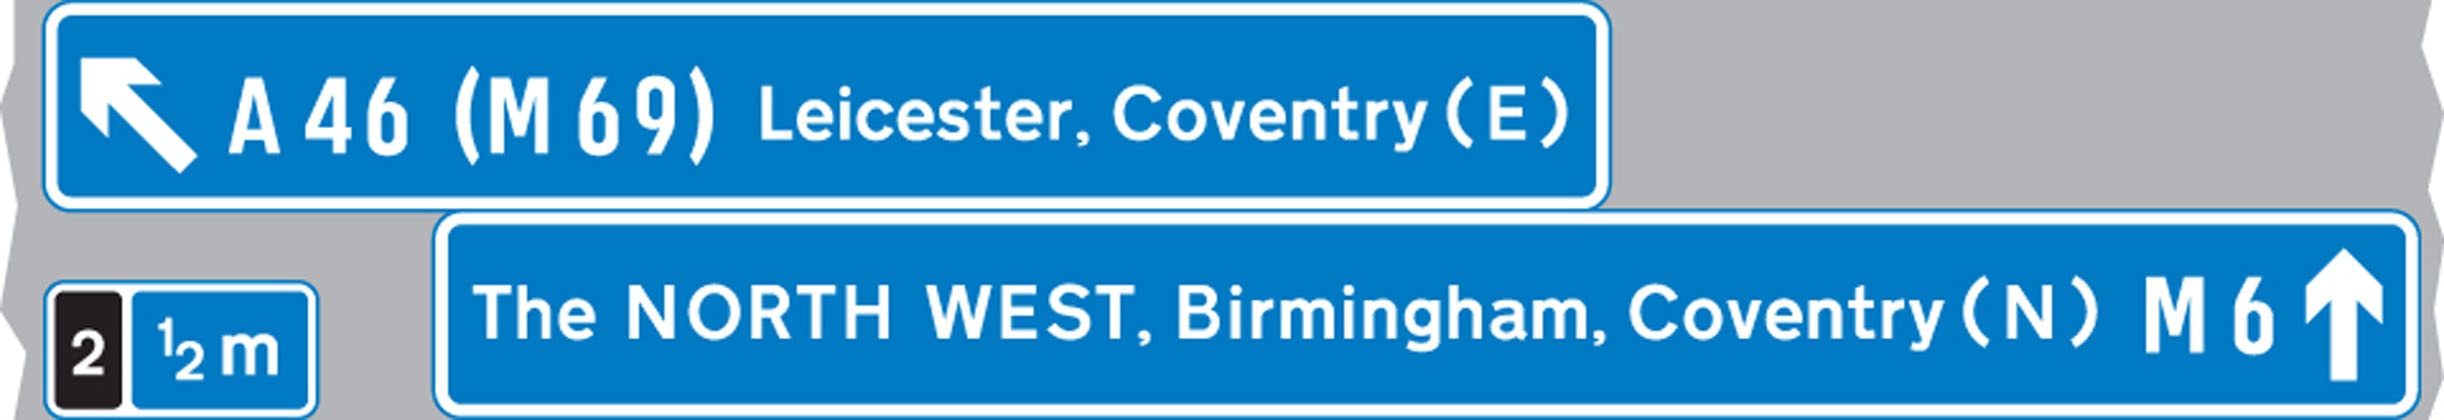 The panel with the inclined arrow indicates the destinations which can be reached by leaving the motorway at the next junction